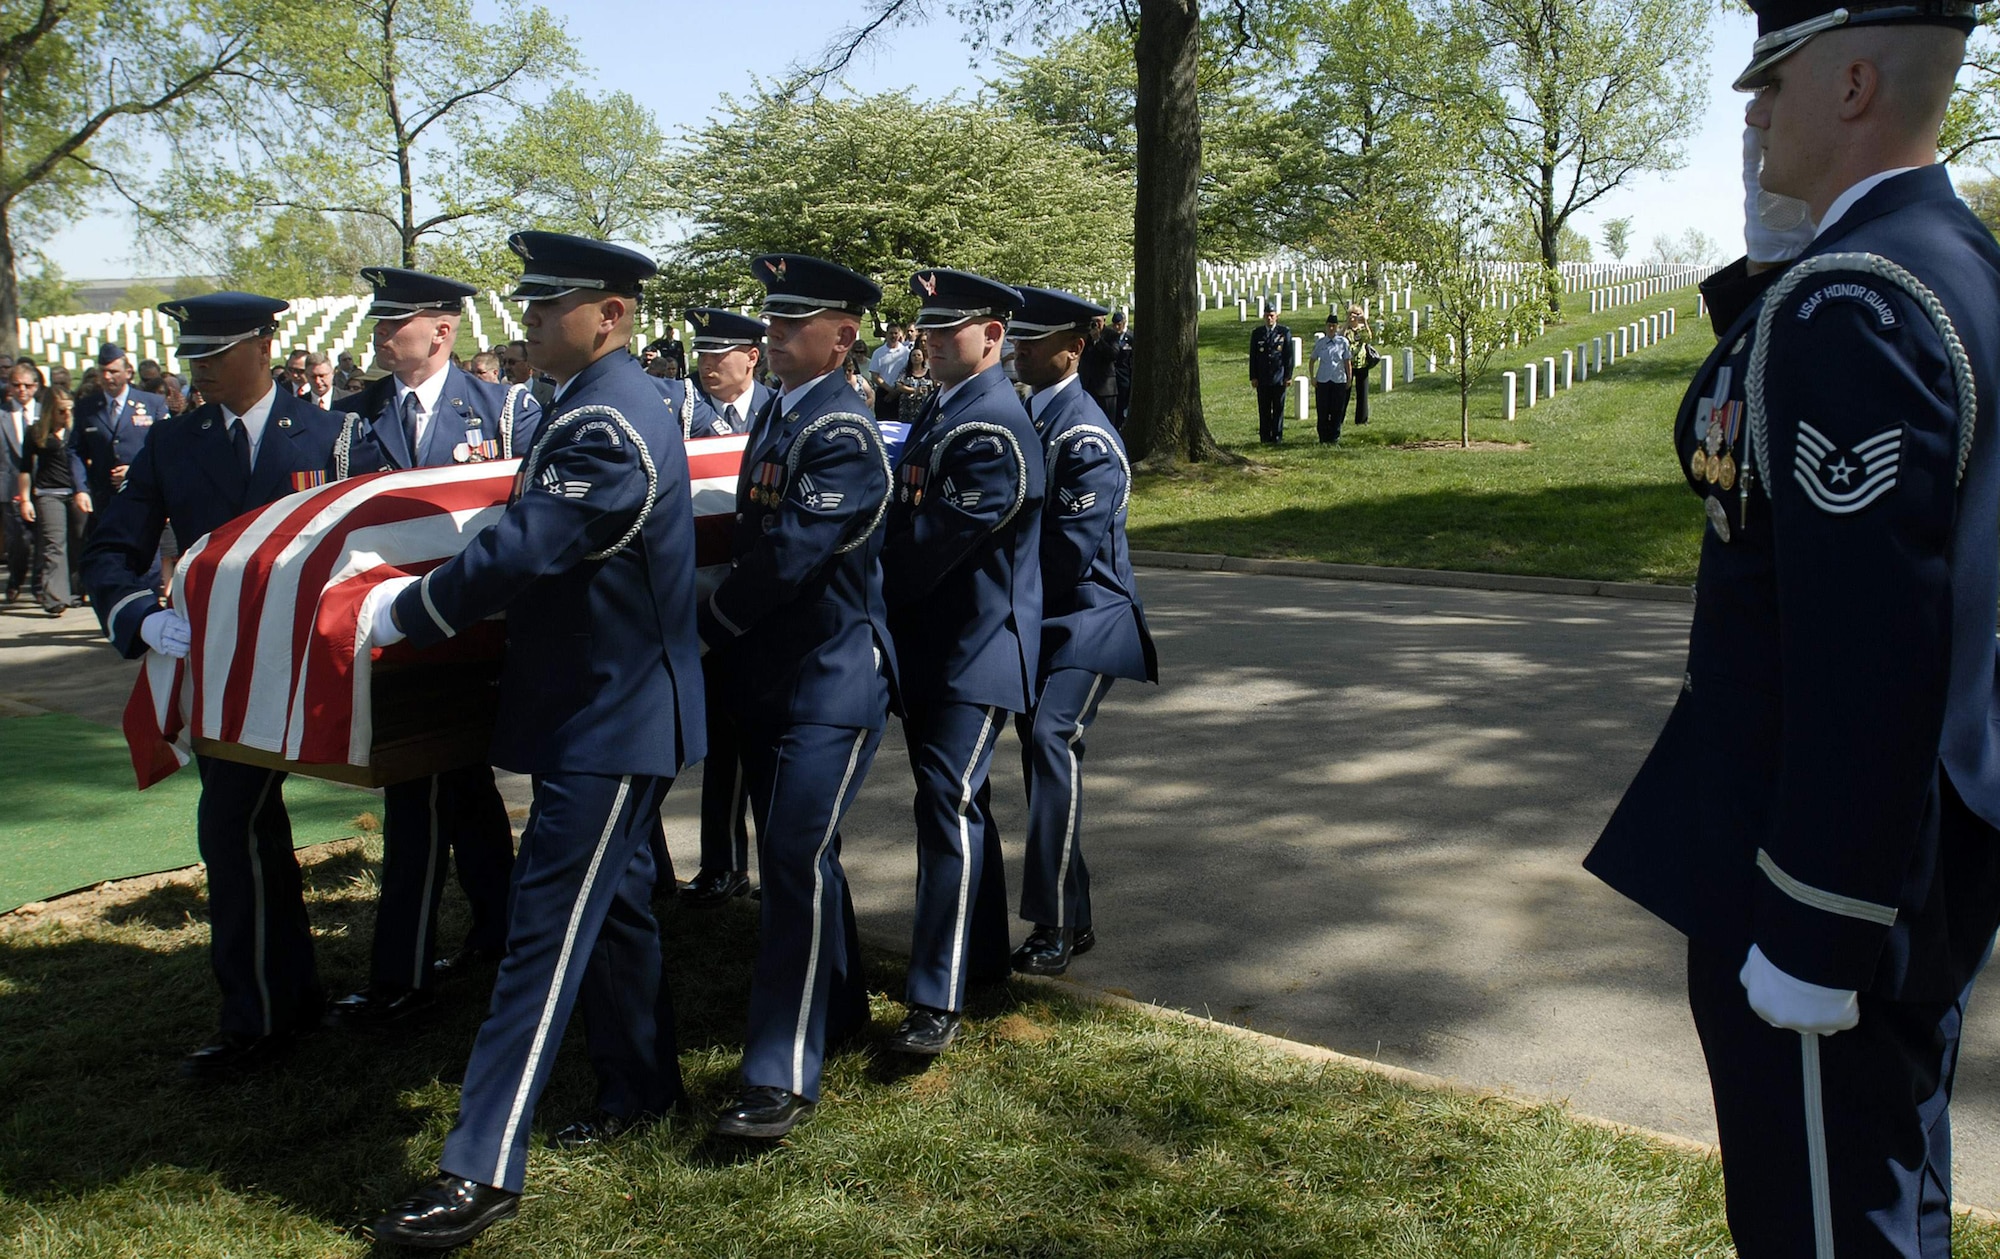 U.S. Air Force Honor Guard Airmen carry the remains of Tech. Sgt. Phillip A. Myers during his funeral April 27 at Arlington National Cemetery. Sergeant Myers, from Hopewell, Va., was killed April 4 in Afghanistan by an improvised explosive device. His family was the first to allow media coverage of the dignified transfer of remains at Dover Air Force Base, Del., since Defense Secretary Robert Gates lifted the 1991 ban April 6. (U.S. Air Force photo/Master Sgt. Stan Parker)